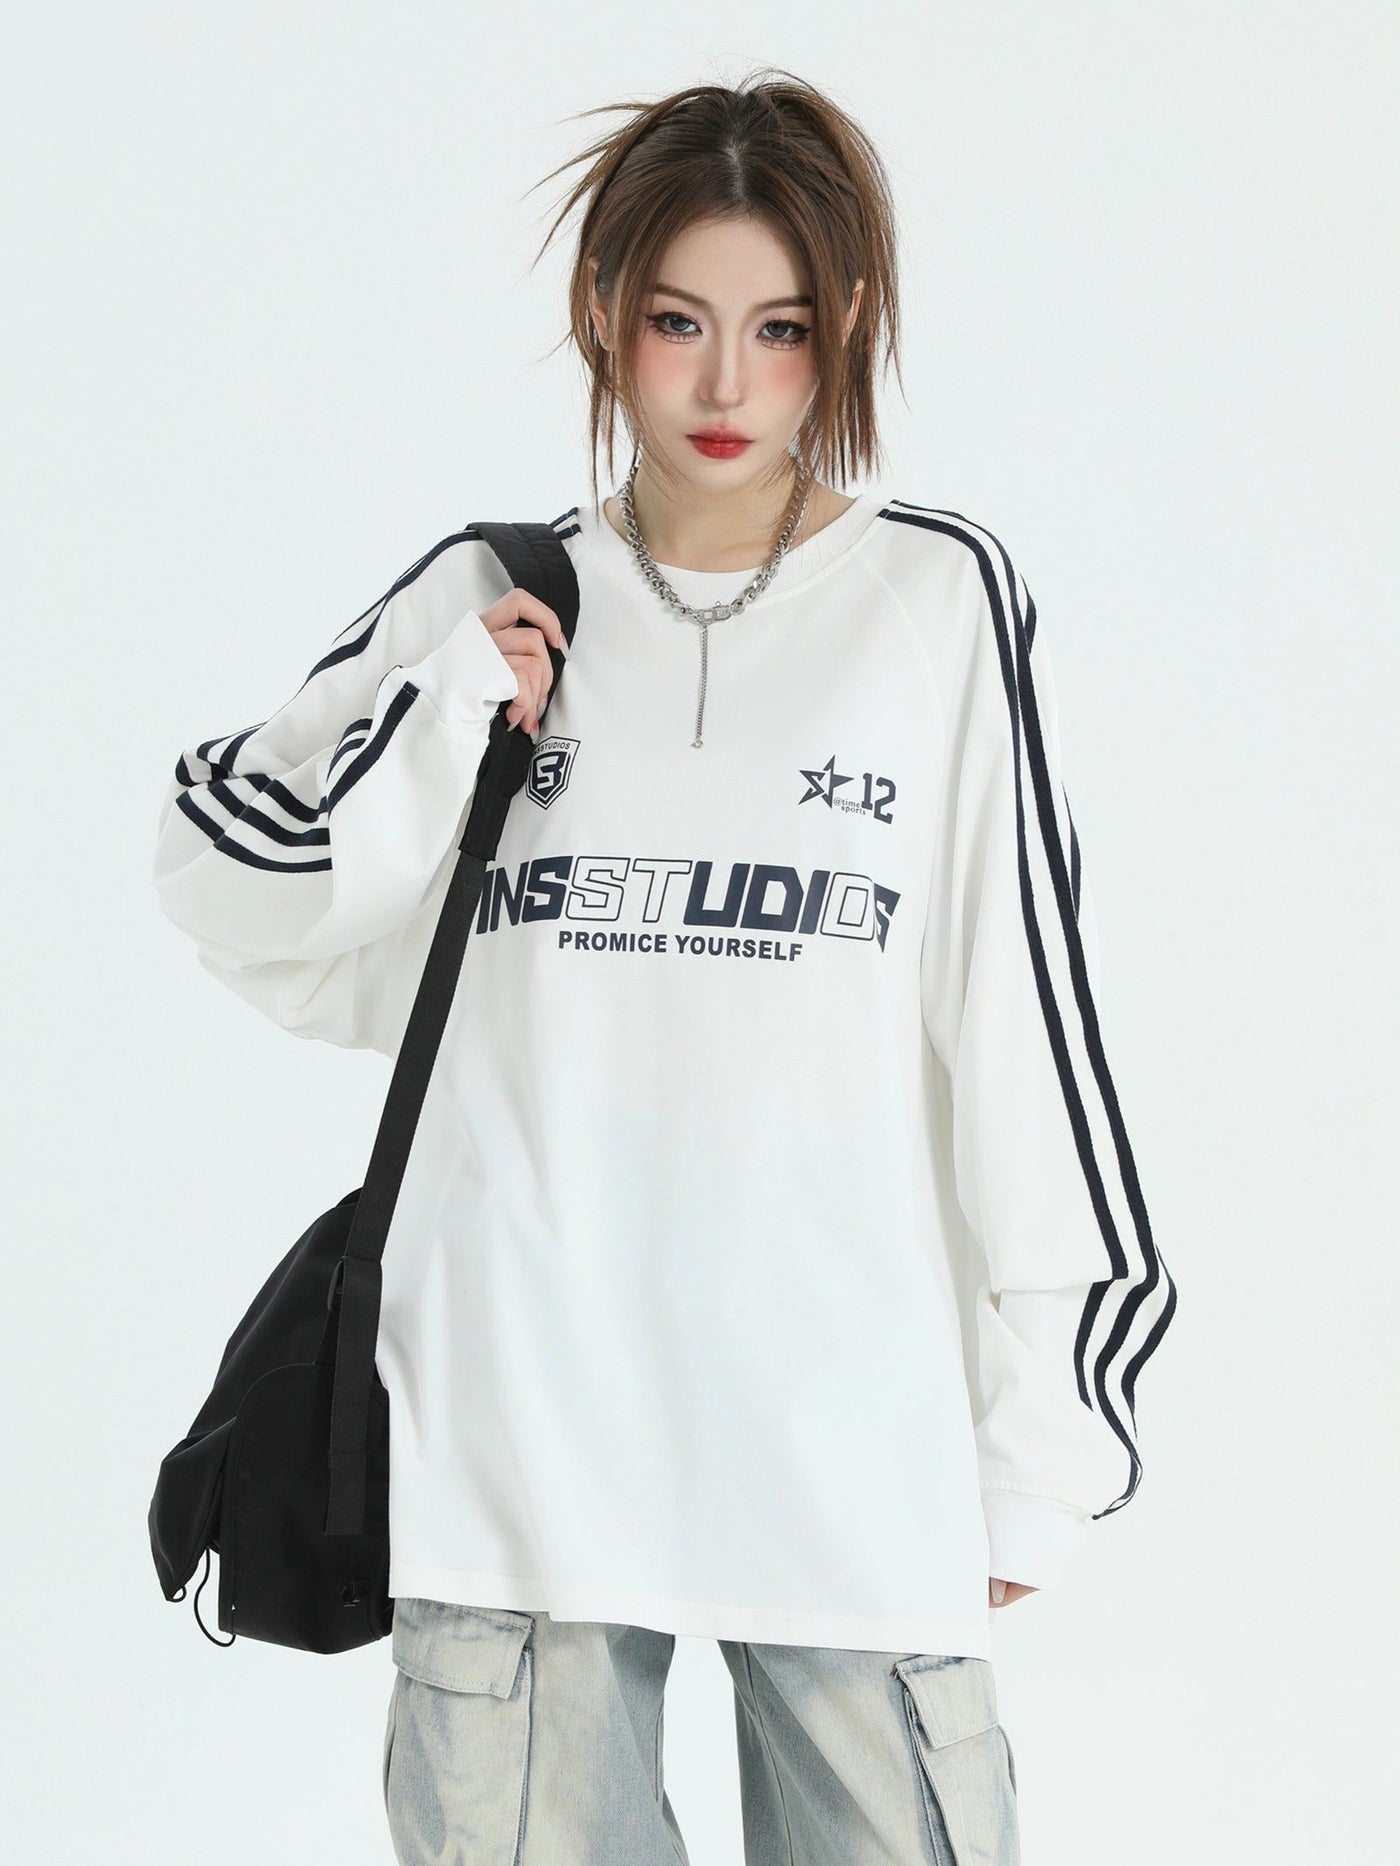 Classic Lettered Long Sleeve T-Shirt Korean Street Fashion T-Shirt By INS Korea Shop Online at OH Vault